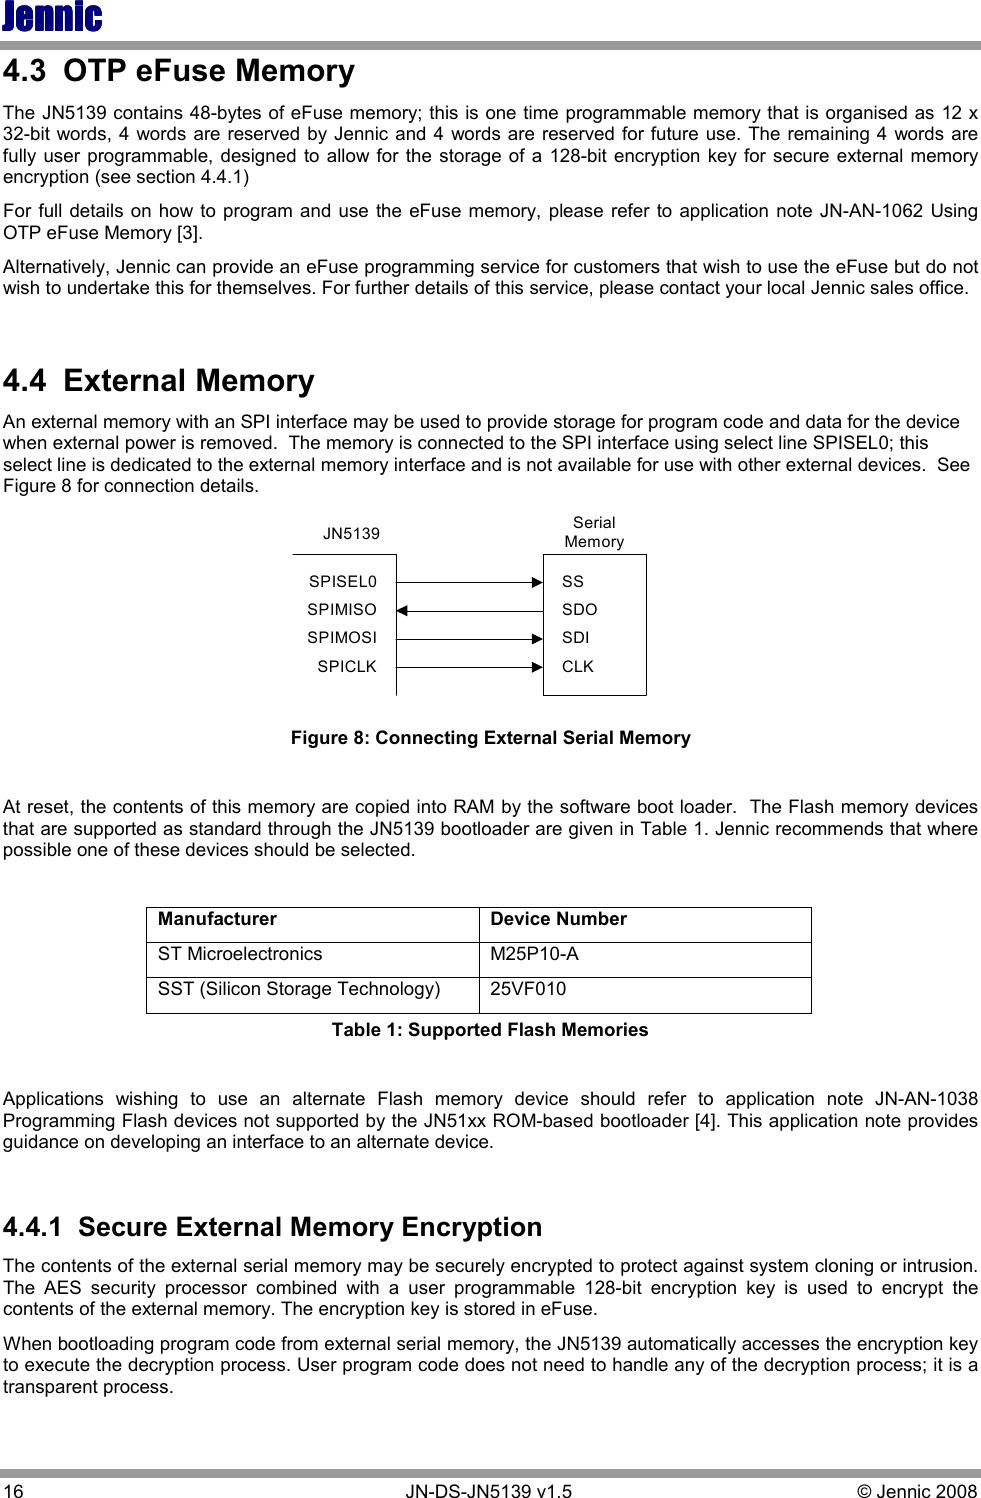 JennicJennicJennicJennic 16        JN-DS-JN5139 v1.5  © Jennic 2008  4.3  OTP eFuse Memory  The JN5139 contains 48-bytes of eFuse memory; this is one time programmable memory that is organised as 12 x 32-bit words, 4 words are reserved by Jennic and 4 words are reserved for future use. The remaining 4  words are fully user programmable, designed to  allow for the  storage of a 128-bit encryption key for secure  external memory encryption (see section 4.4.1)   For full details  on how to program and  use the eFuse memory, please refer  to application note JN-AN-1062 Using OTP eFuse Memory [3]. Alternatively, Jennic can provide an eFuse programming service for customers that wish to use the eFuse but do not wish to undertake this for themselves. For further details of this service, please contact your local Jennic sales office.  4.4  External Memory An external memory with an SPI interface may be used to provide storage for program code and data for the device when external power is removed.  The memory is connected to the SPI interface using select line SPISEL0; this select line is dedicated to the external memory interface and is not available for use with other external devices.  See Figure 8 for connection details. JN5139 SerialMemorySPISEL0SPIMISOSPIMOSISPICLKSSSDOSDICLK Figure 8: Connecting External Serial Memory  At reset, the contents of this memory are copied into RAM by the software boot loader.  The Flash memory devices that are supported as standard through the JN5139 bootloader are given in Table 1. Jennic recommends that where possible one of these devices should be selected.  Manufacturer  Device Number ST Microelectronics  M25P10-A SST (Silicon Storage Technology)  25VF010 Table 1: Supported Flash Memories  Applications  wishing  to  use  an  alternate  Flash  memory  device  should  refer  to  application  note  JN-AN-1038 Programming Flash devices not supported by the JN51xx ROM-based bootloader [4]. This application note provides guidance on developing an interface to an alternate device.  4.4.1  Secure External Memory Encryption The contents of the external serial memory may be securely encrypted to protect against system cloning or intrusion. The  AES  security  processor  combined  with  a  user  programmable  128-bit  encryption  key  is  used  to  encrypt  the contents of the external memory. The encryption key is stored in eFuse. When bootloading program code from external serial memory, the JN5139 automatically accesses the encryption key to execute the decryption process. User program code does not need to handle any of the decryption process; it is a transparent process. 